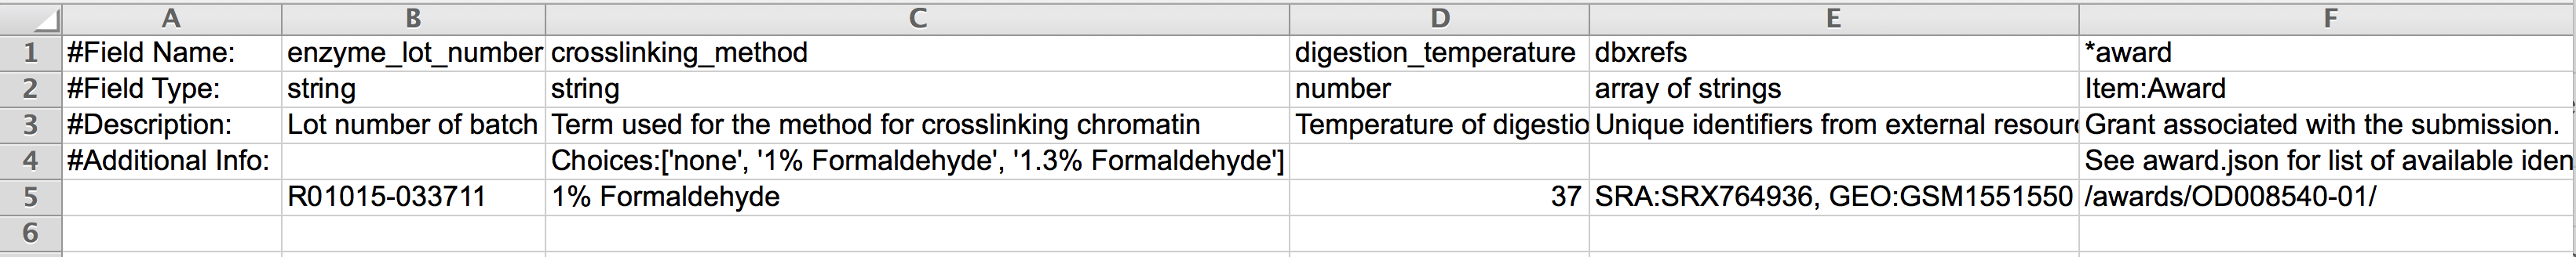 Basic fields examples